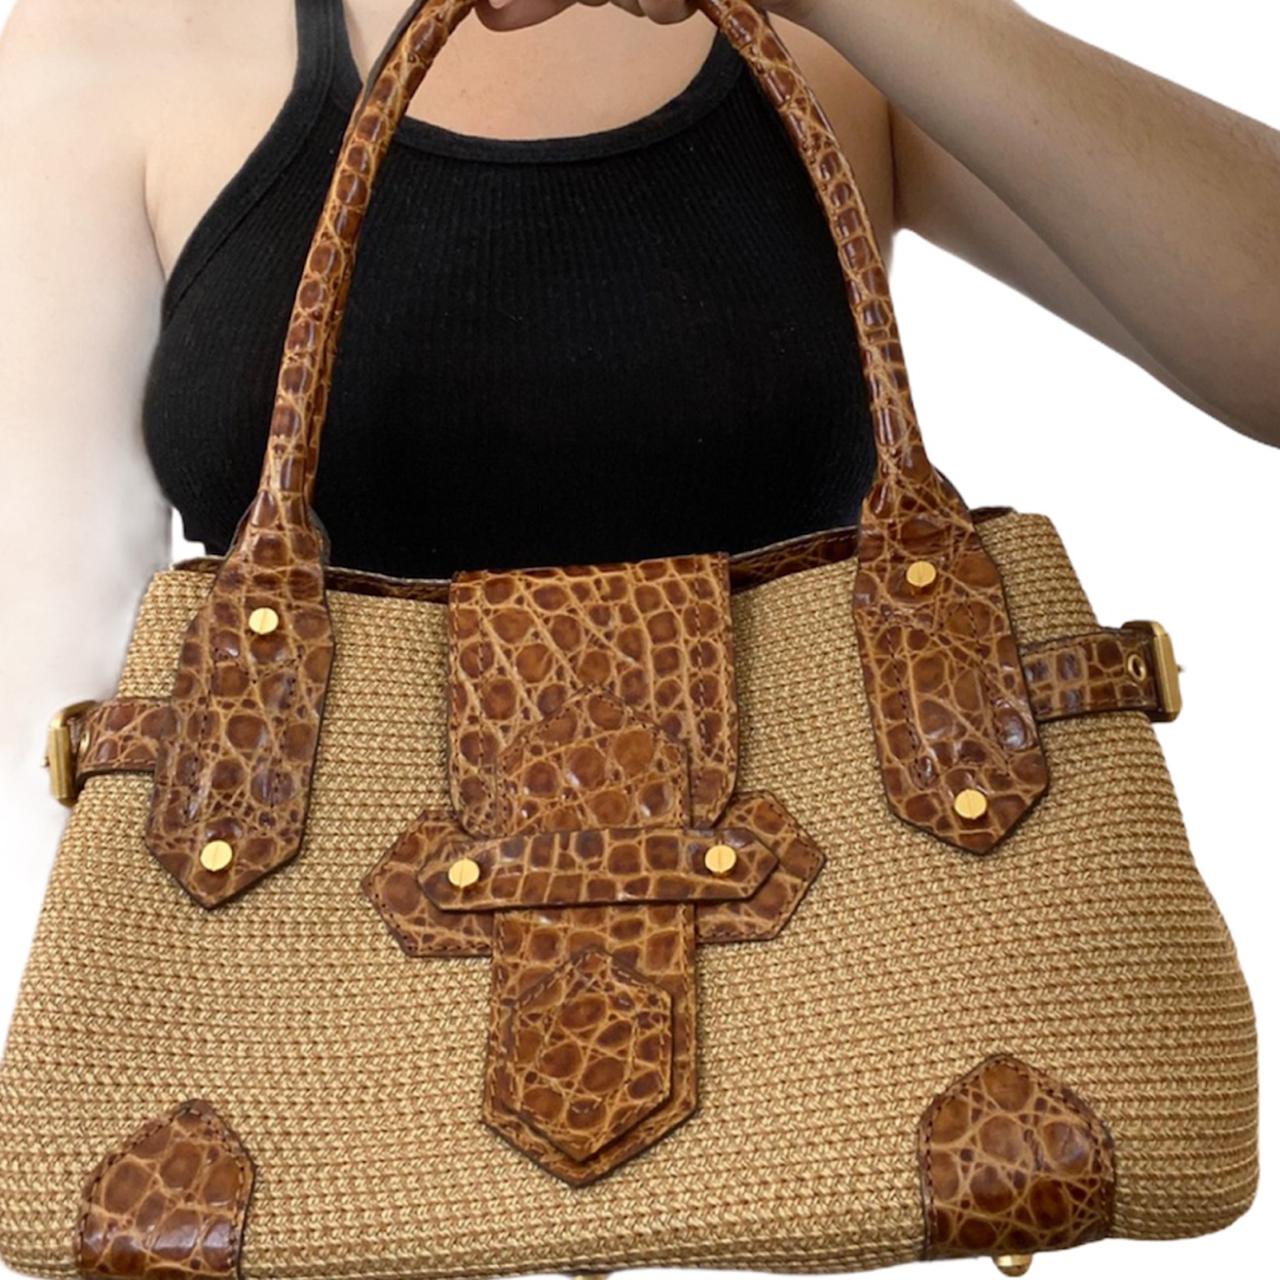 Product Image 3 - Eric Javits Brown Purse
Purchased from